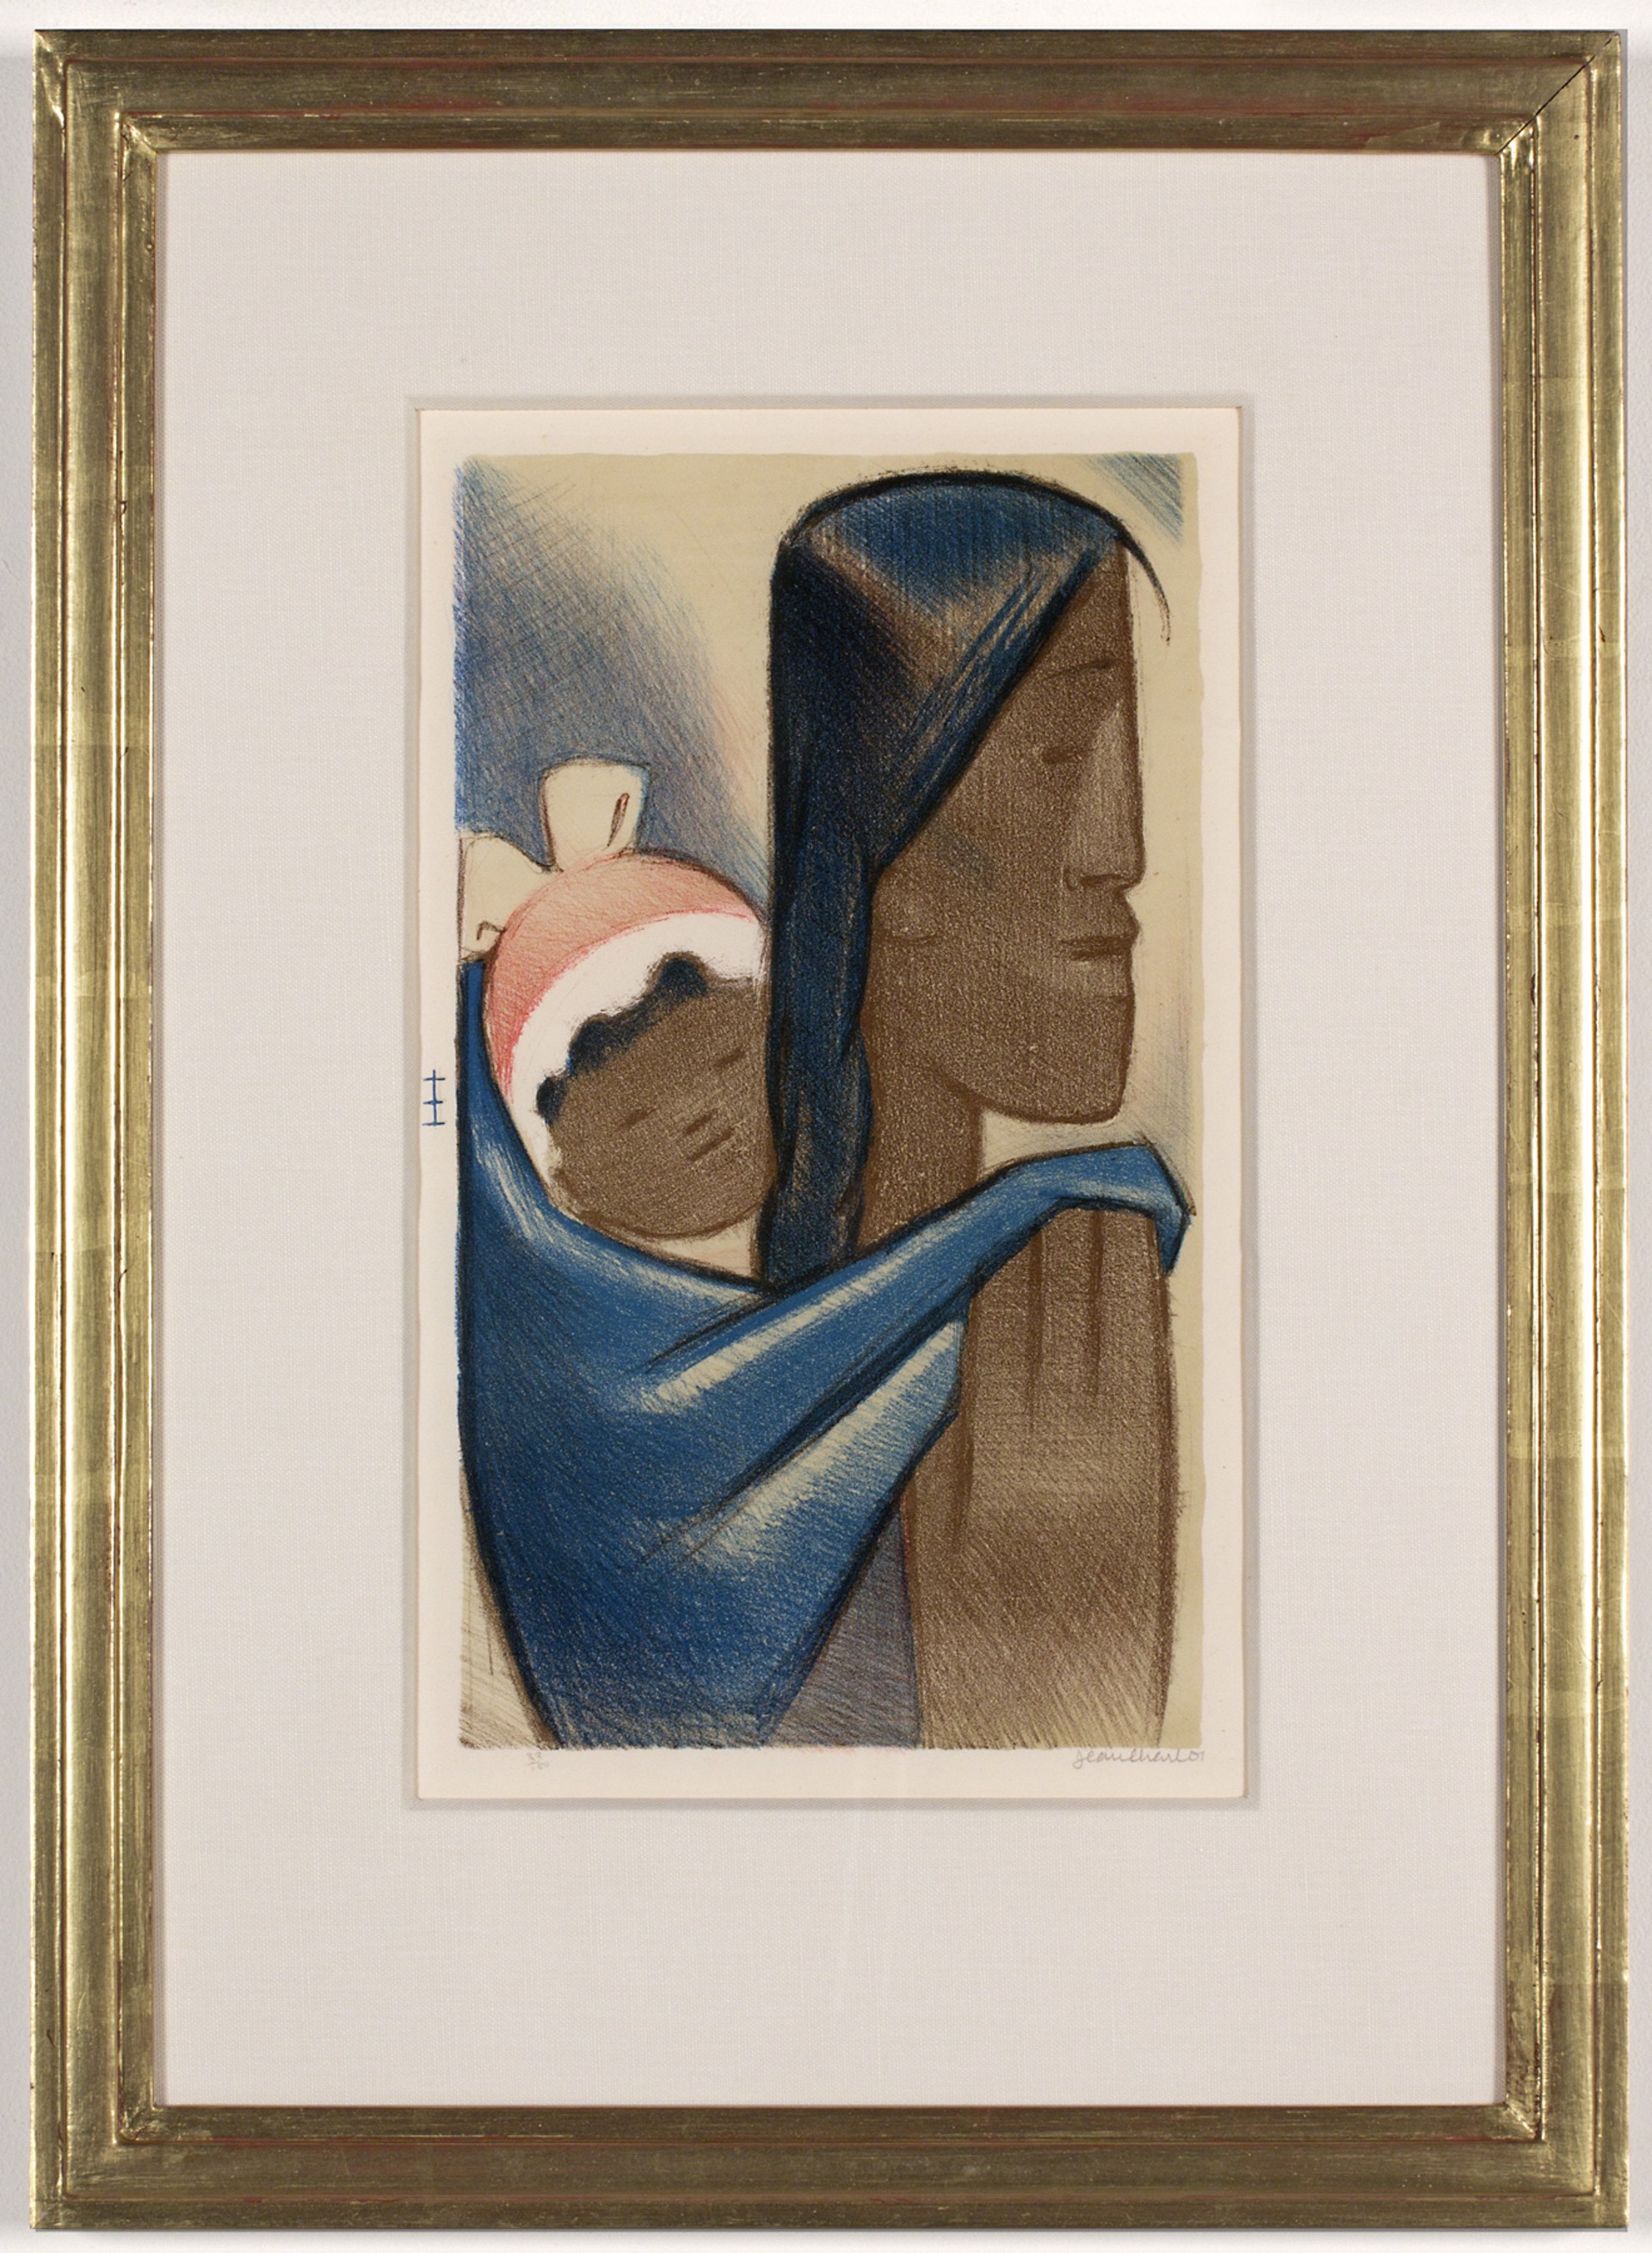 Pilgrims (Mother with Child on Back) by Jean Charlot